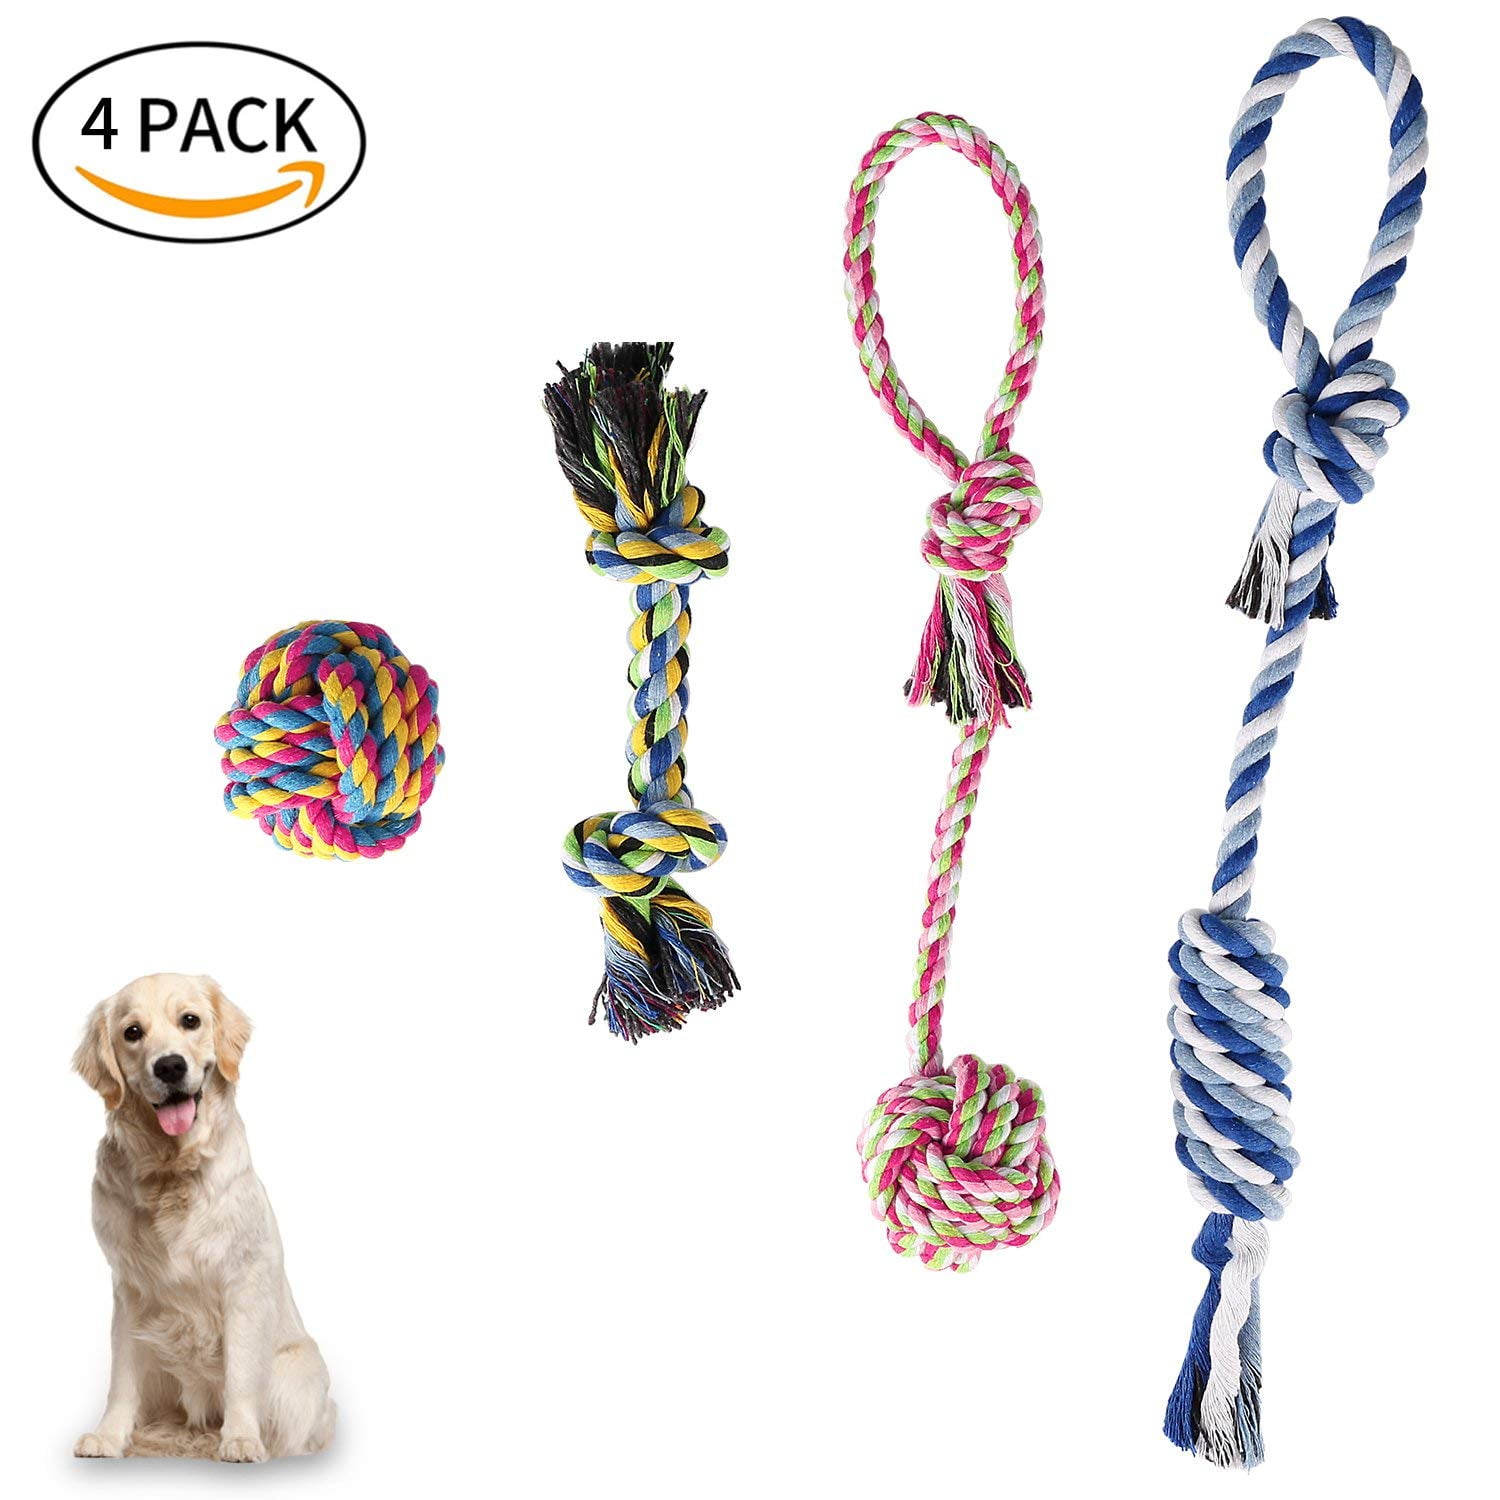 Bulk with Squeakers for Small Dogs Non-Toxic and Interactive Pet Toys Durable Cute Puppy Chew Toys for Puppy Teething Toys Feeko Squeaky Plush Dog Rope Toy 6 Pack for Puppy Safe 